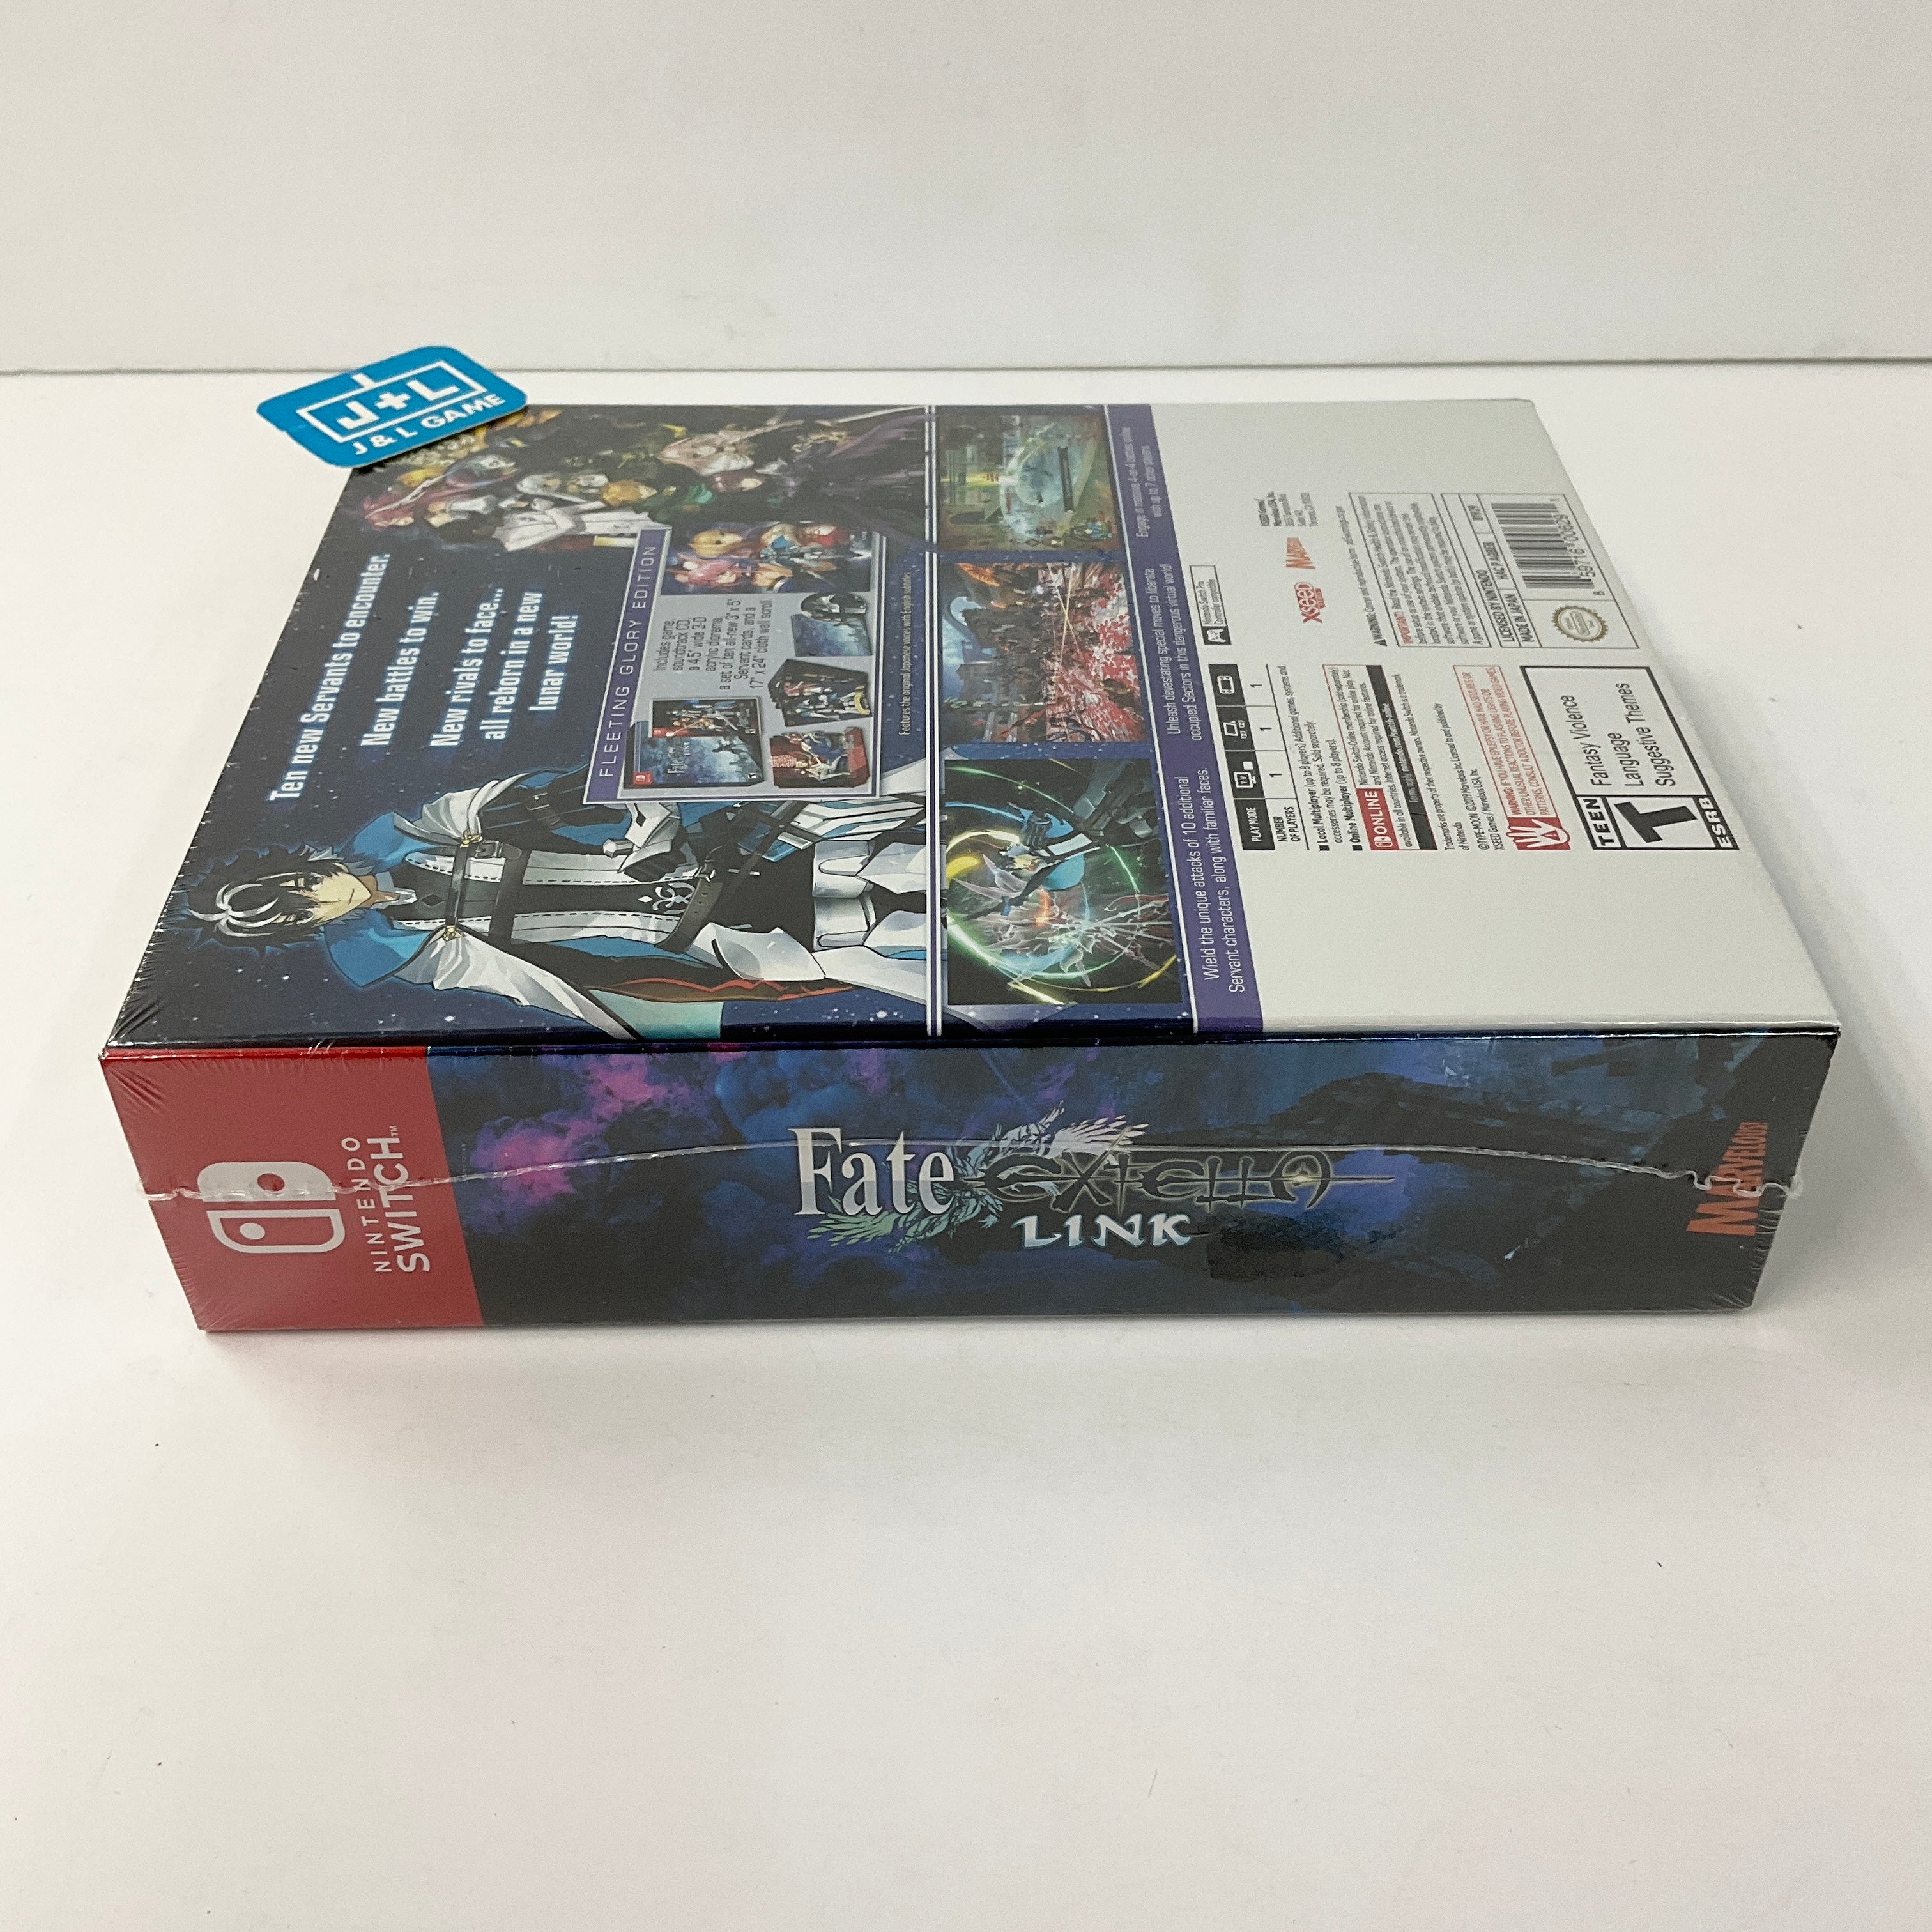 Fate/Extella Link (Fleeting Glory Edition) - (NSW) Nintendo Switch Video Games XSEED Games   